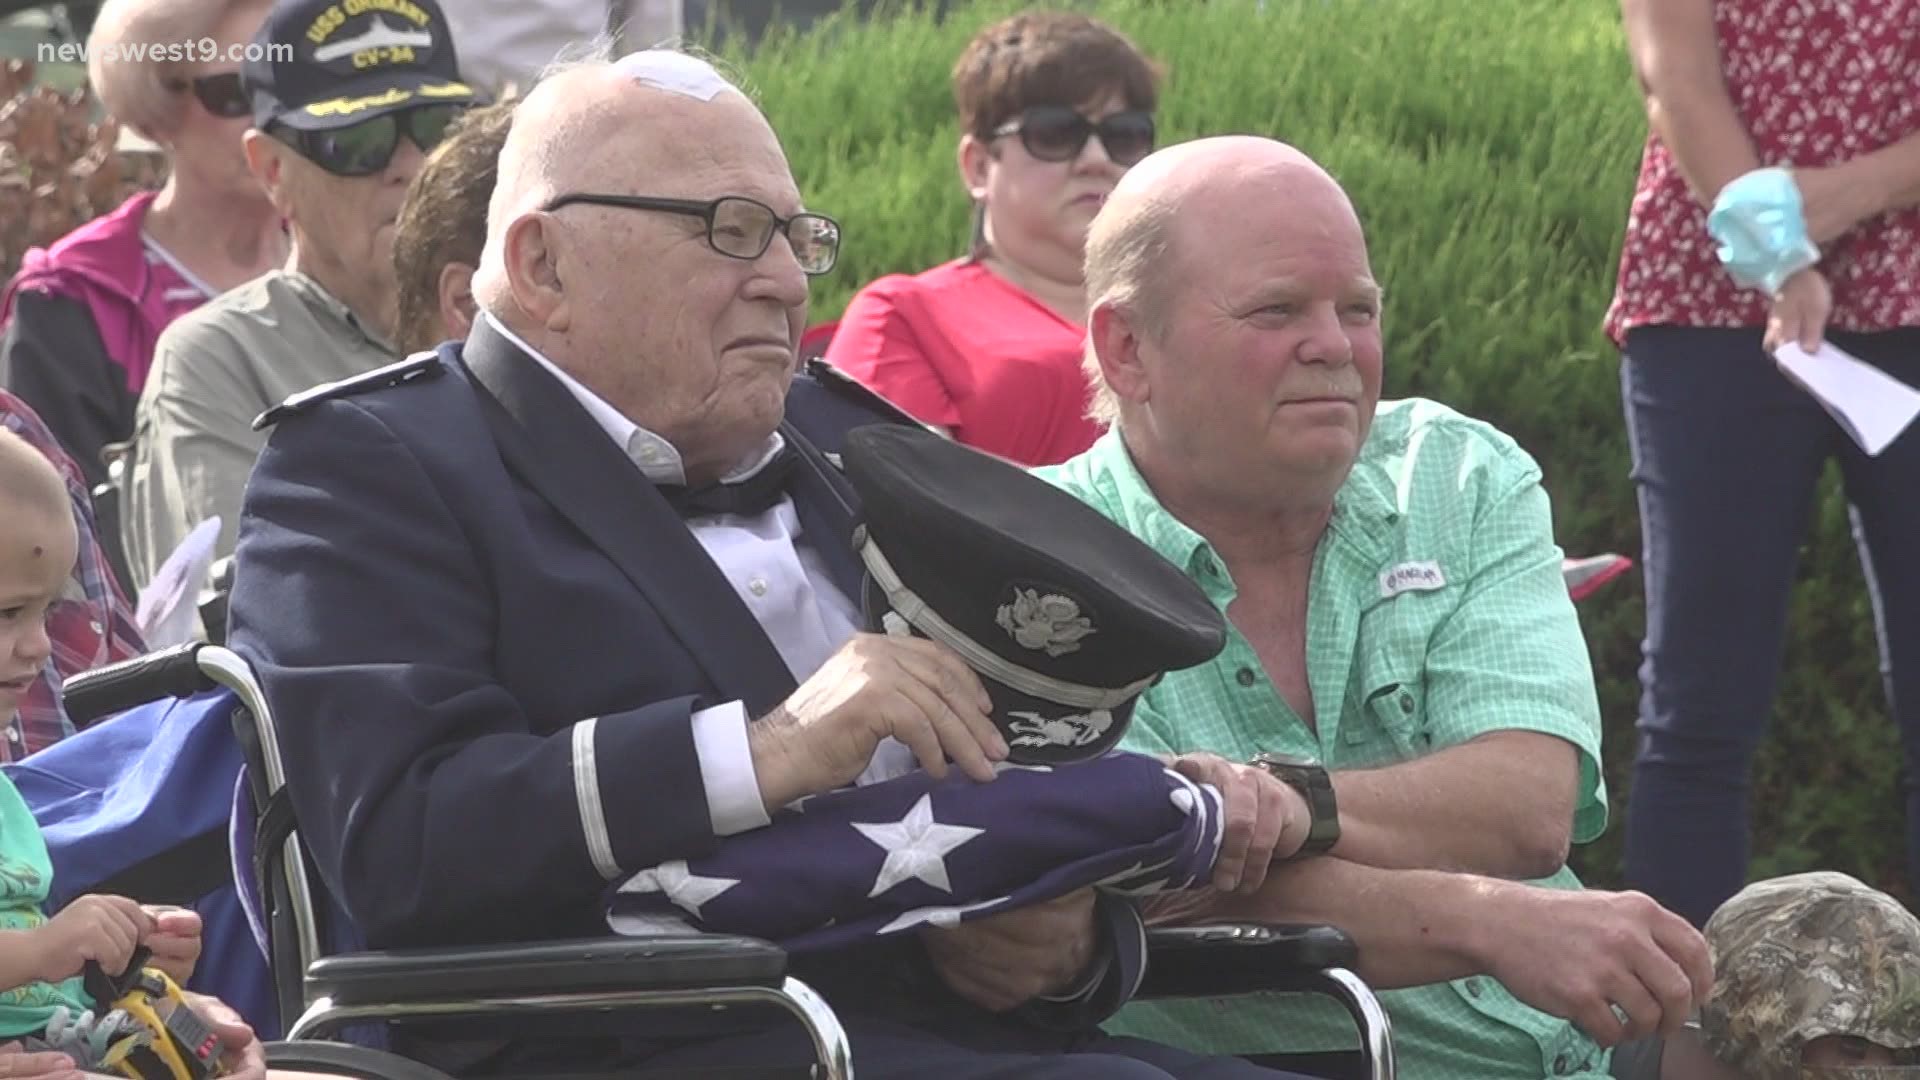 The Midland County Sheriff presented a folded flag to the most decorated veteran in Midland.